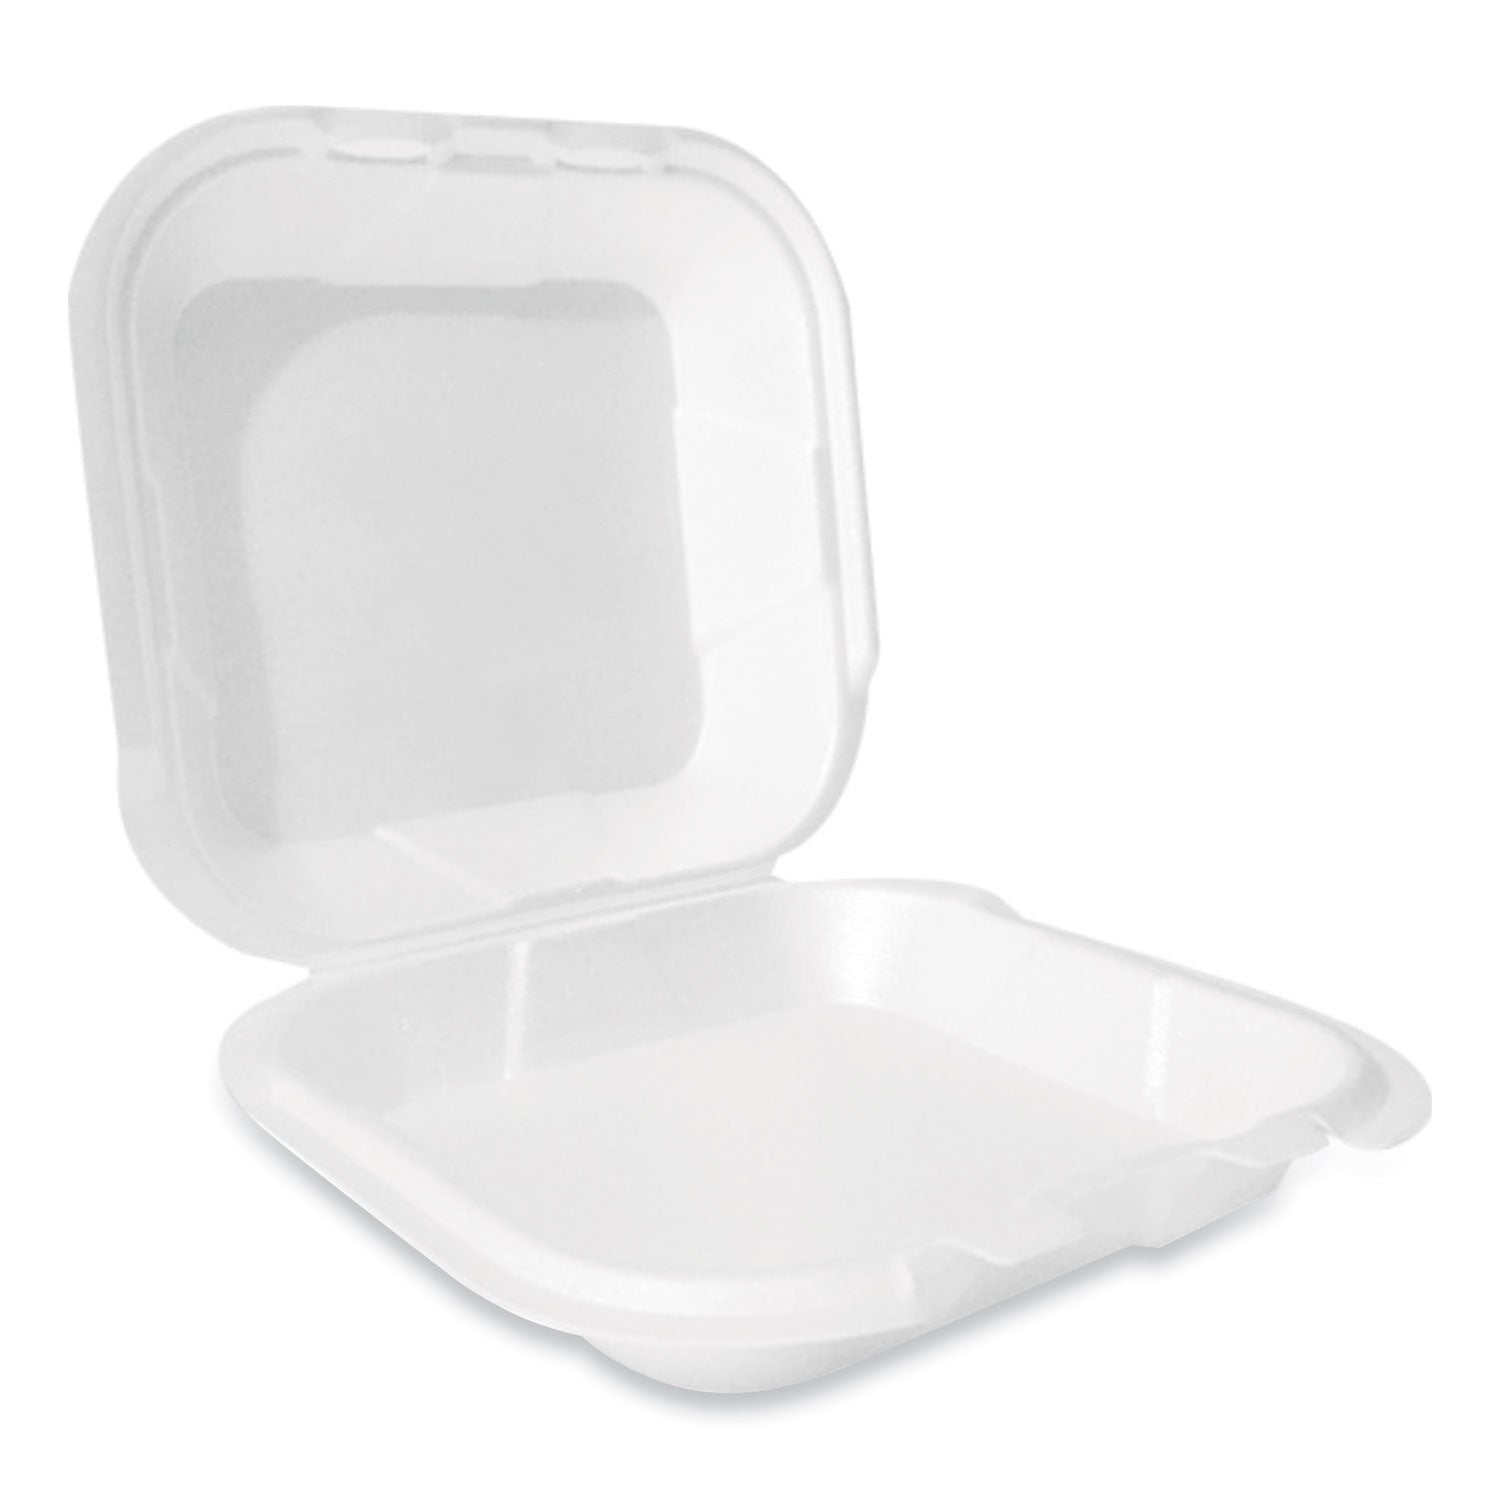 foam-hinged-lid-container-secure-two-tab-latch-poly-bag-9-x-9-x-3-white-100-bag-2-bags-carton_pst12095 - 1